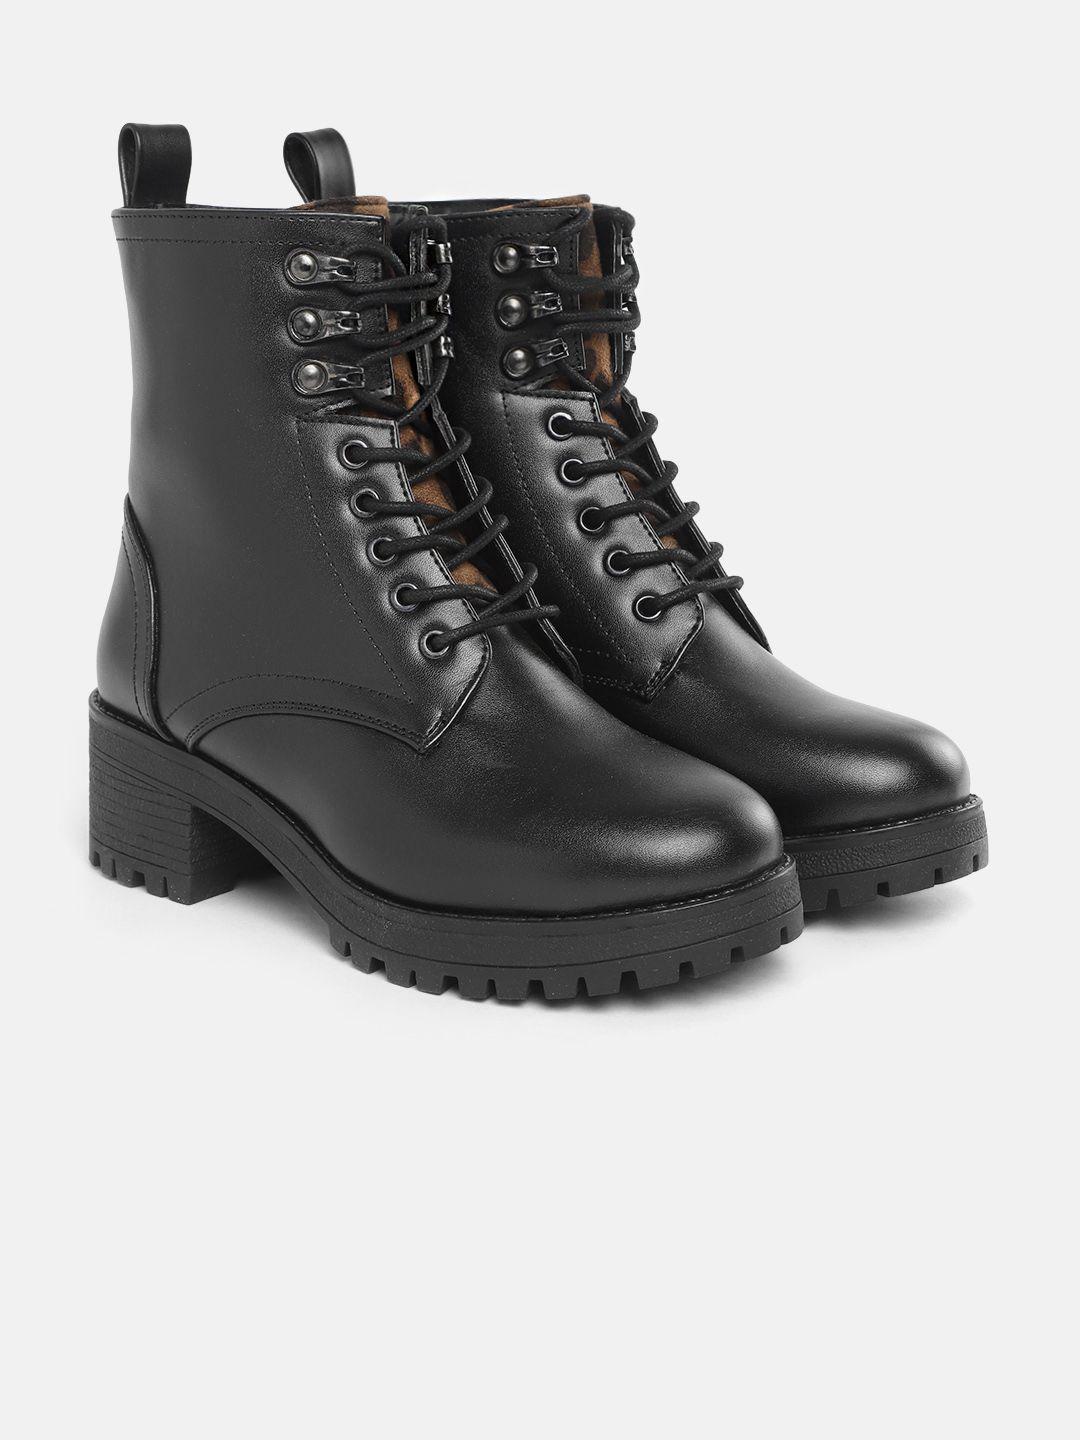 the roadster lifestyle co women black solid mid-top flat boots